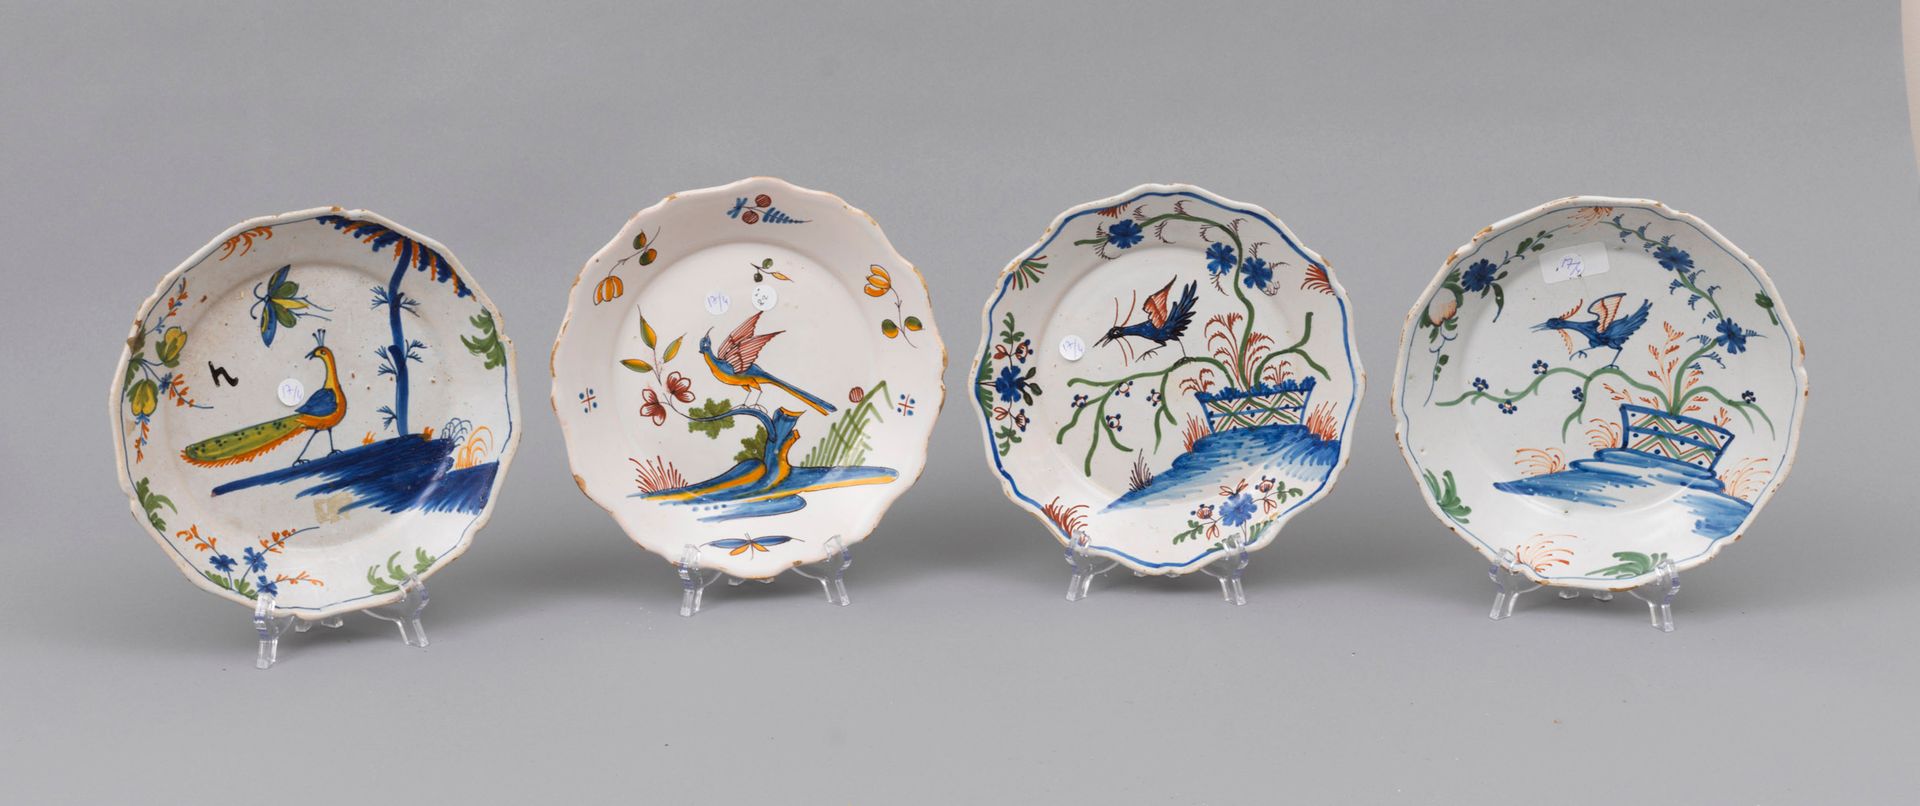 Faience Nevers 
Nevers

Four earthenware plates with contoured edges to dp of a &hellip;